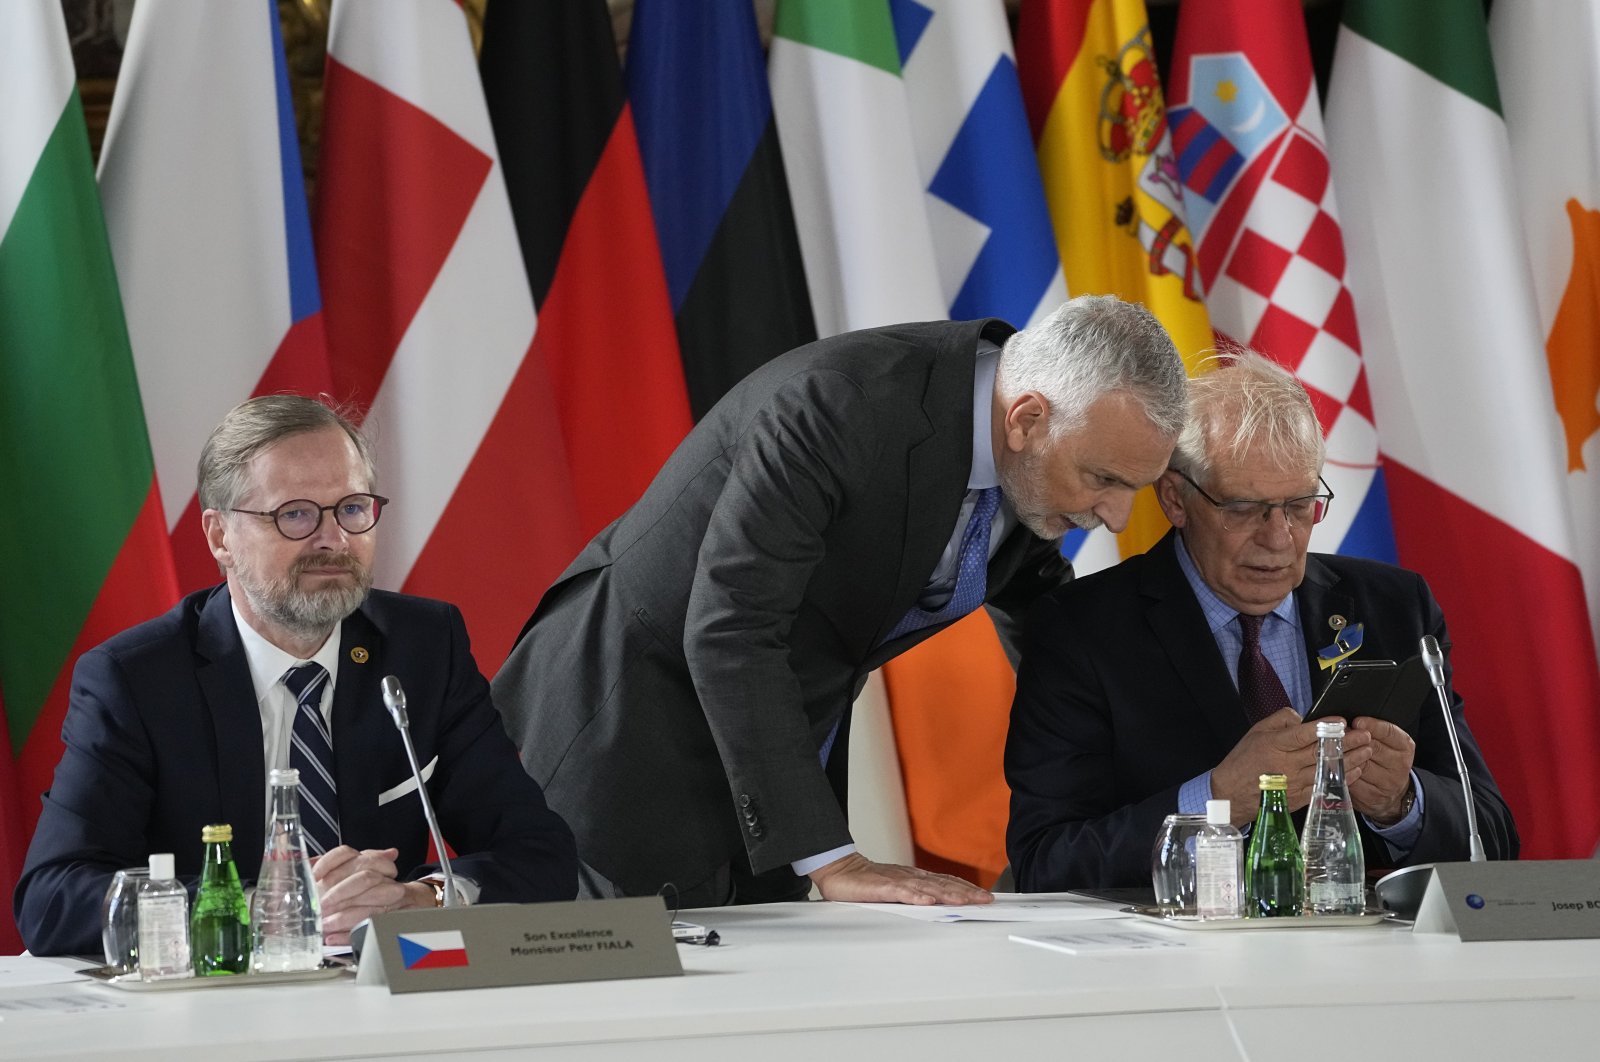 Czech Republic&#039;s Prime Minister Petr Fiala (L) and European Union foreign policy chief Josep Borrell attend a round table meeting at an EU summit at the Chateau de Versailles, in Versailles, west of Paris, March 10, 2022. (AP Photo)